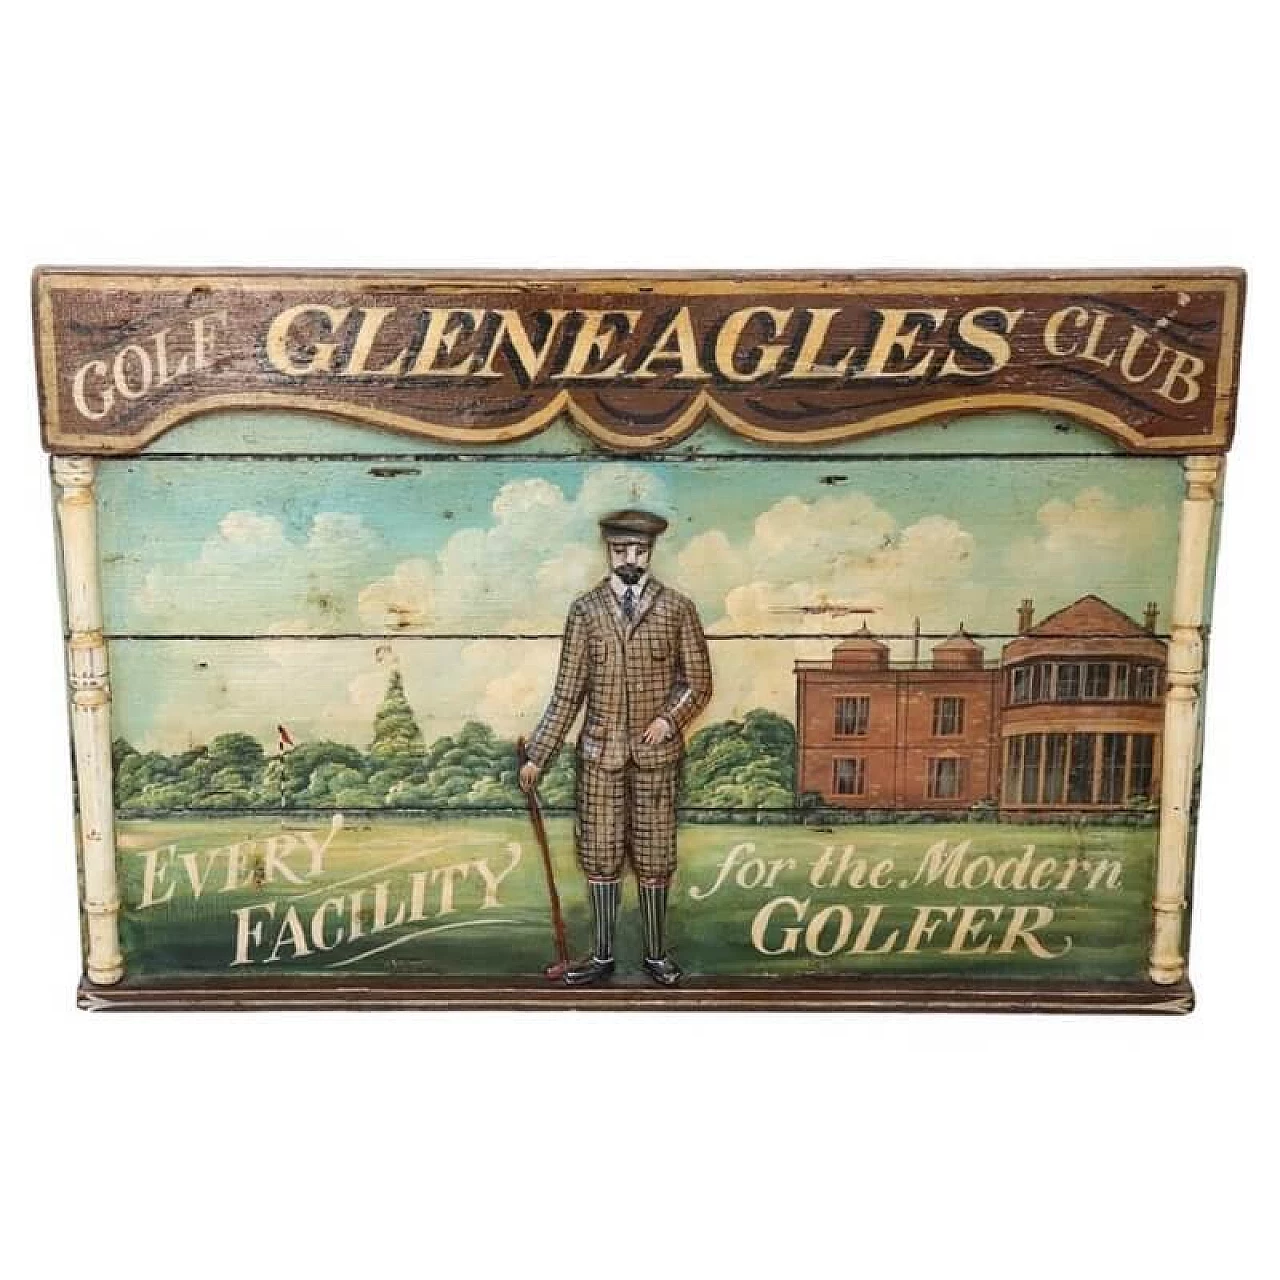 Hand-painted sign on wood for Gleneagles golf club, 1920s 1